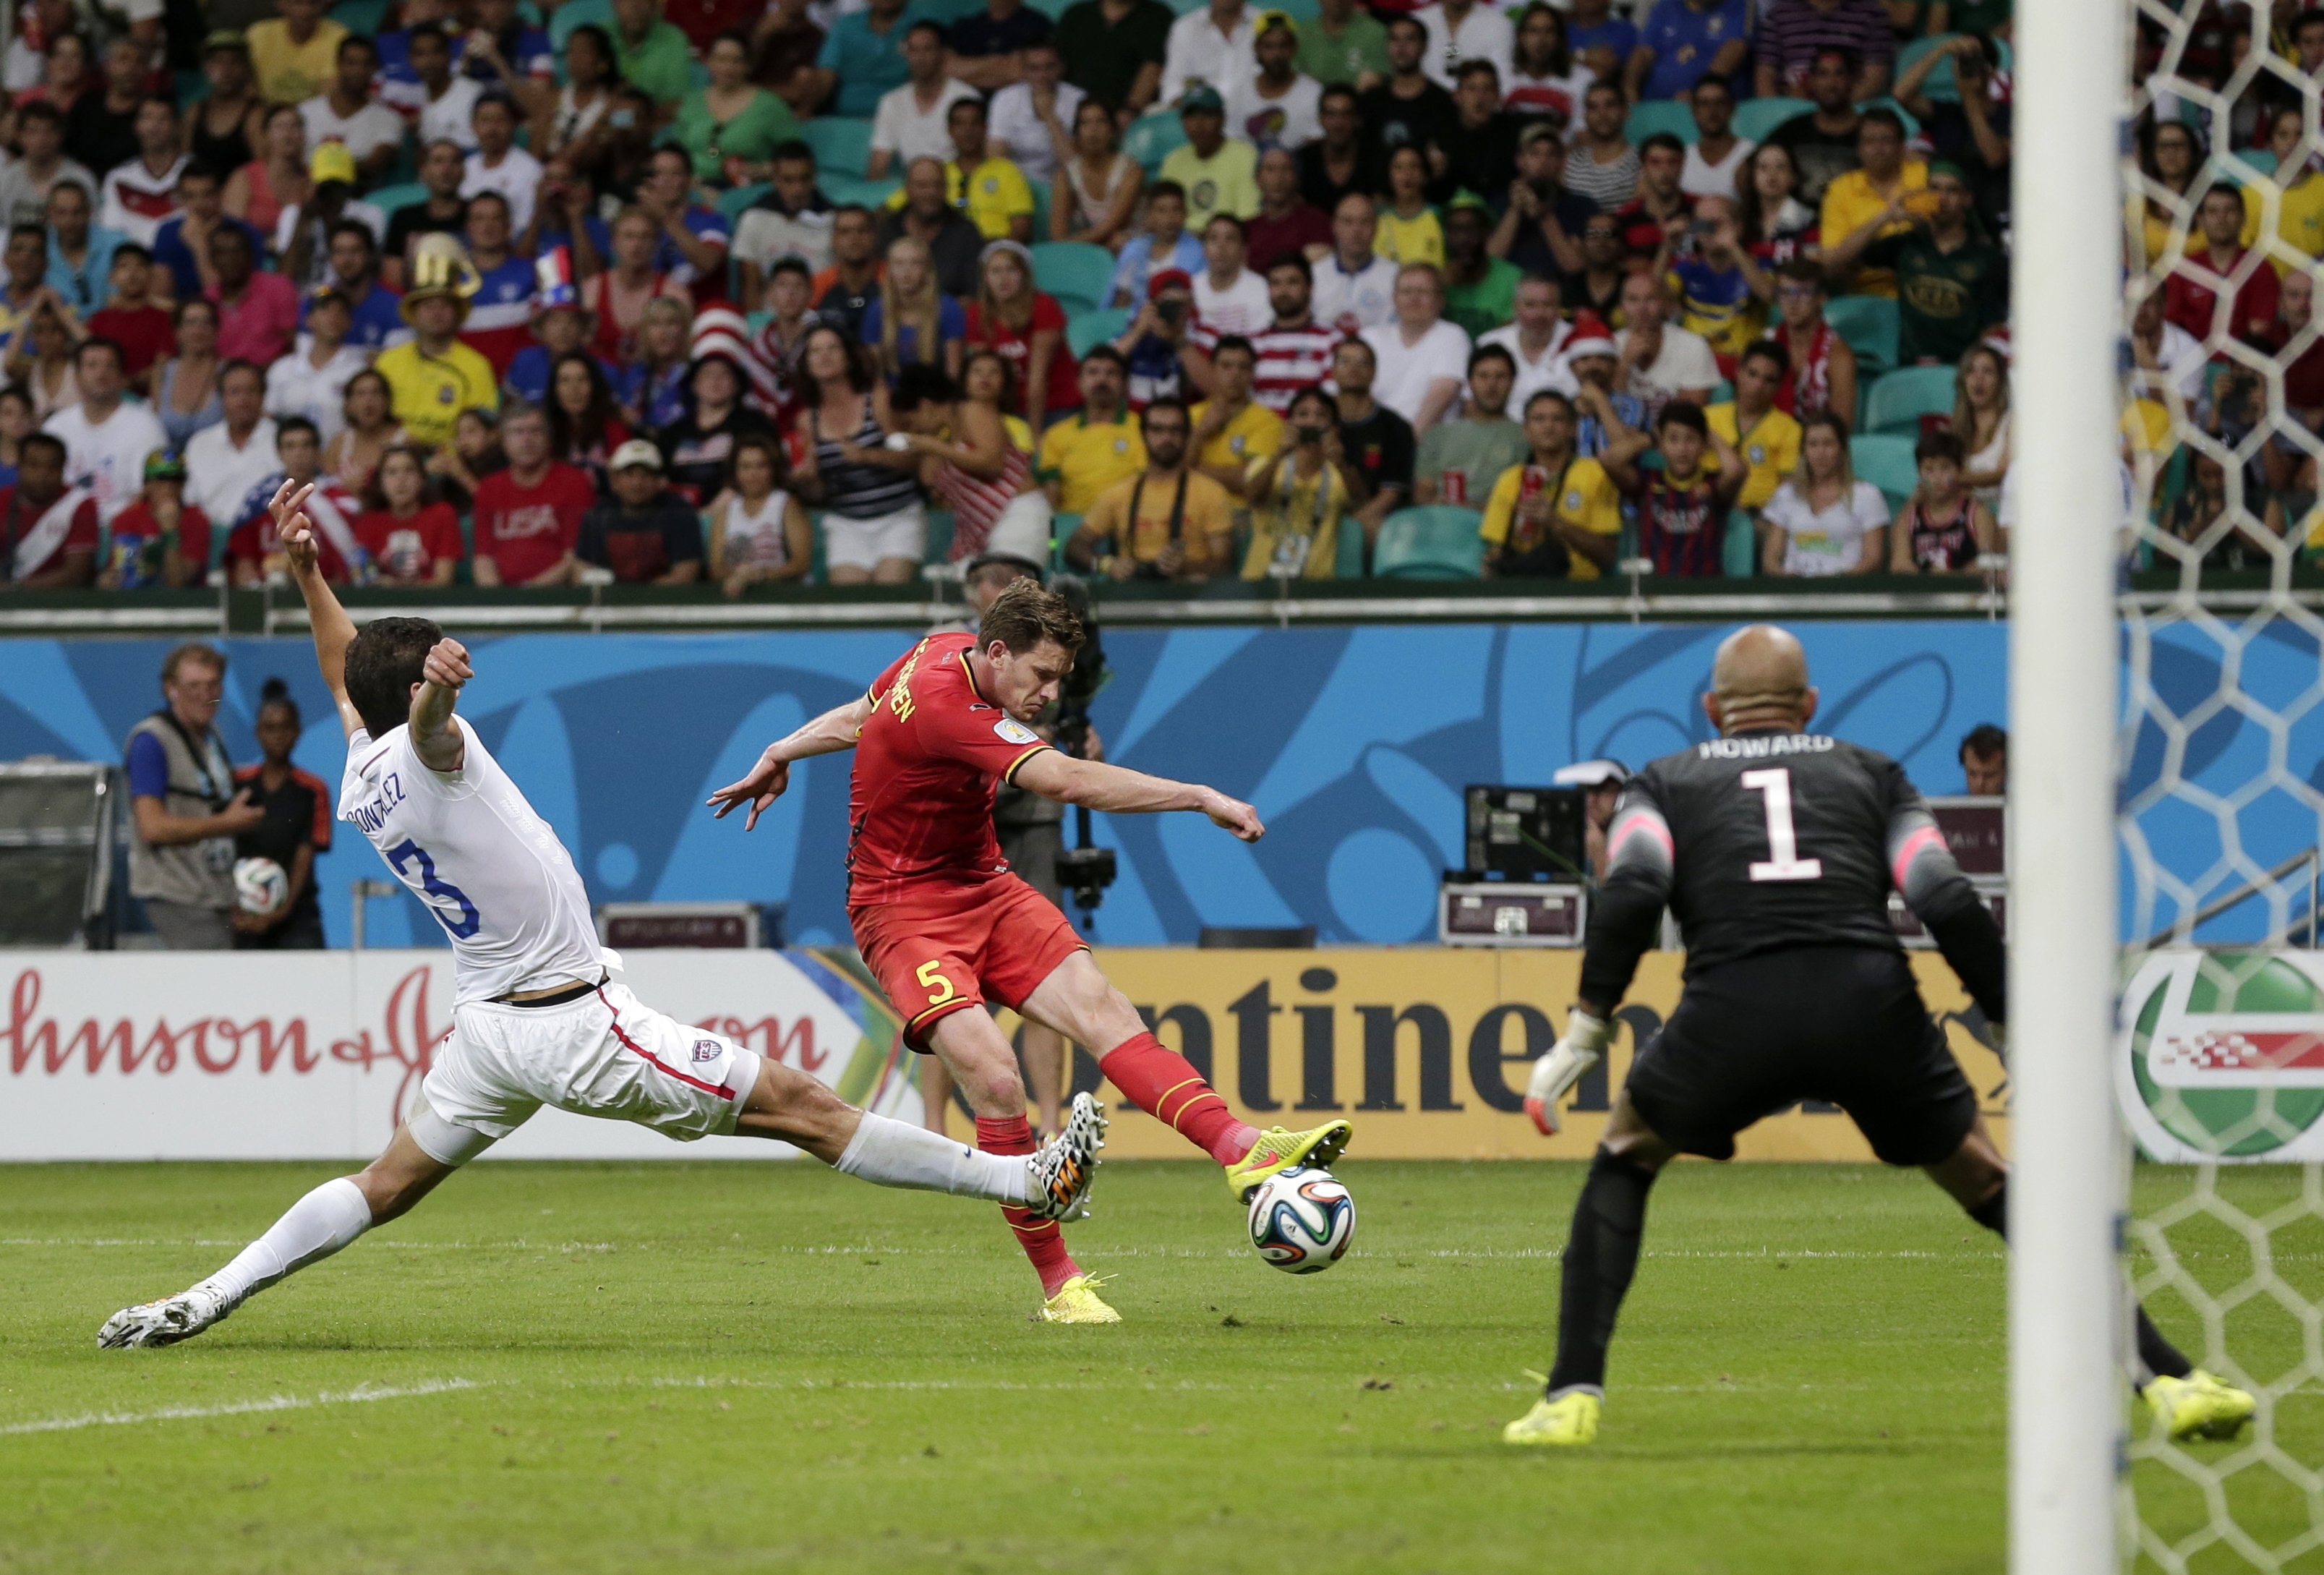 United States' Omar Gonzalez (3) tries to defend as Belgium's Jan Vertonghen gets a shot on United States' goalkeeper Tim Howard during the World Cup round of 16 soccer match between Belgium and the USA at the Arena Fonte Nova in Salvador, Brazil, Tuesday, July 1, 2014. (AP Photo/Marcio Jose Sanchez)